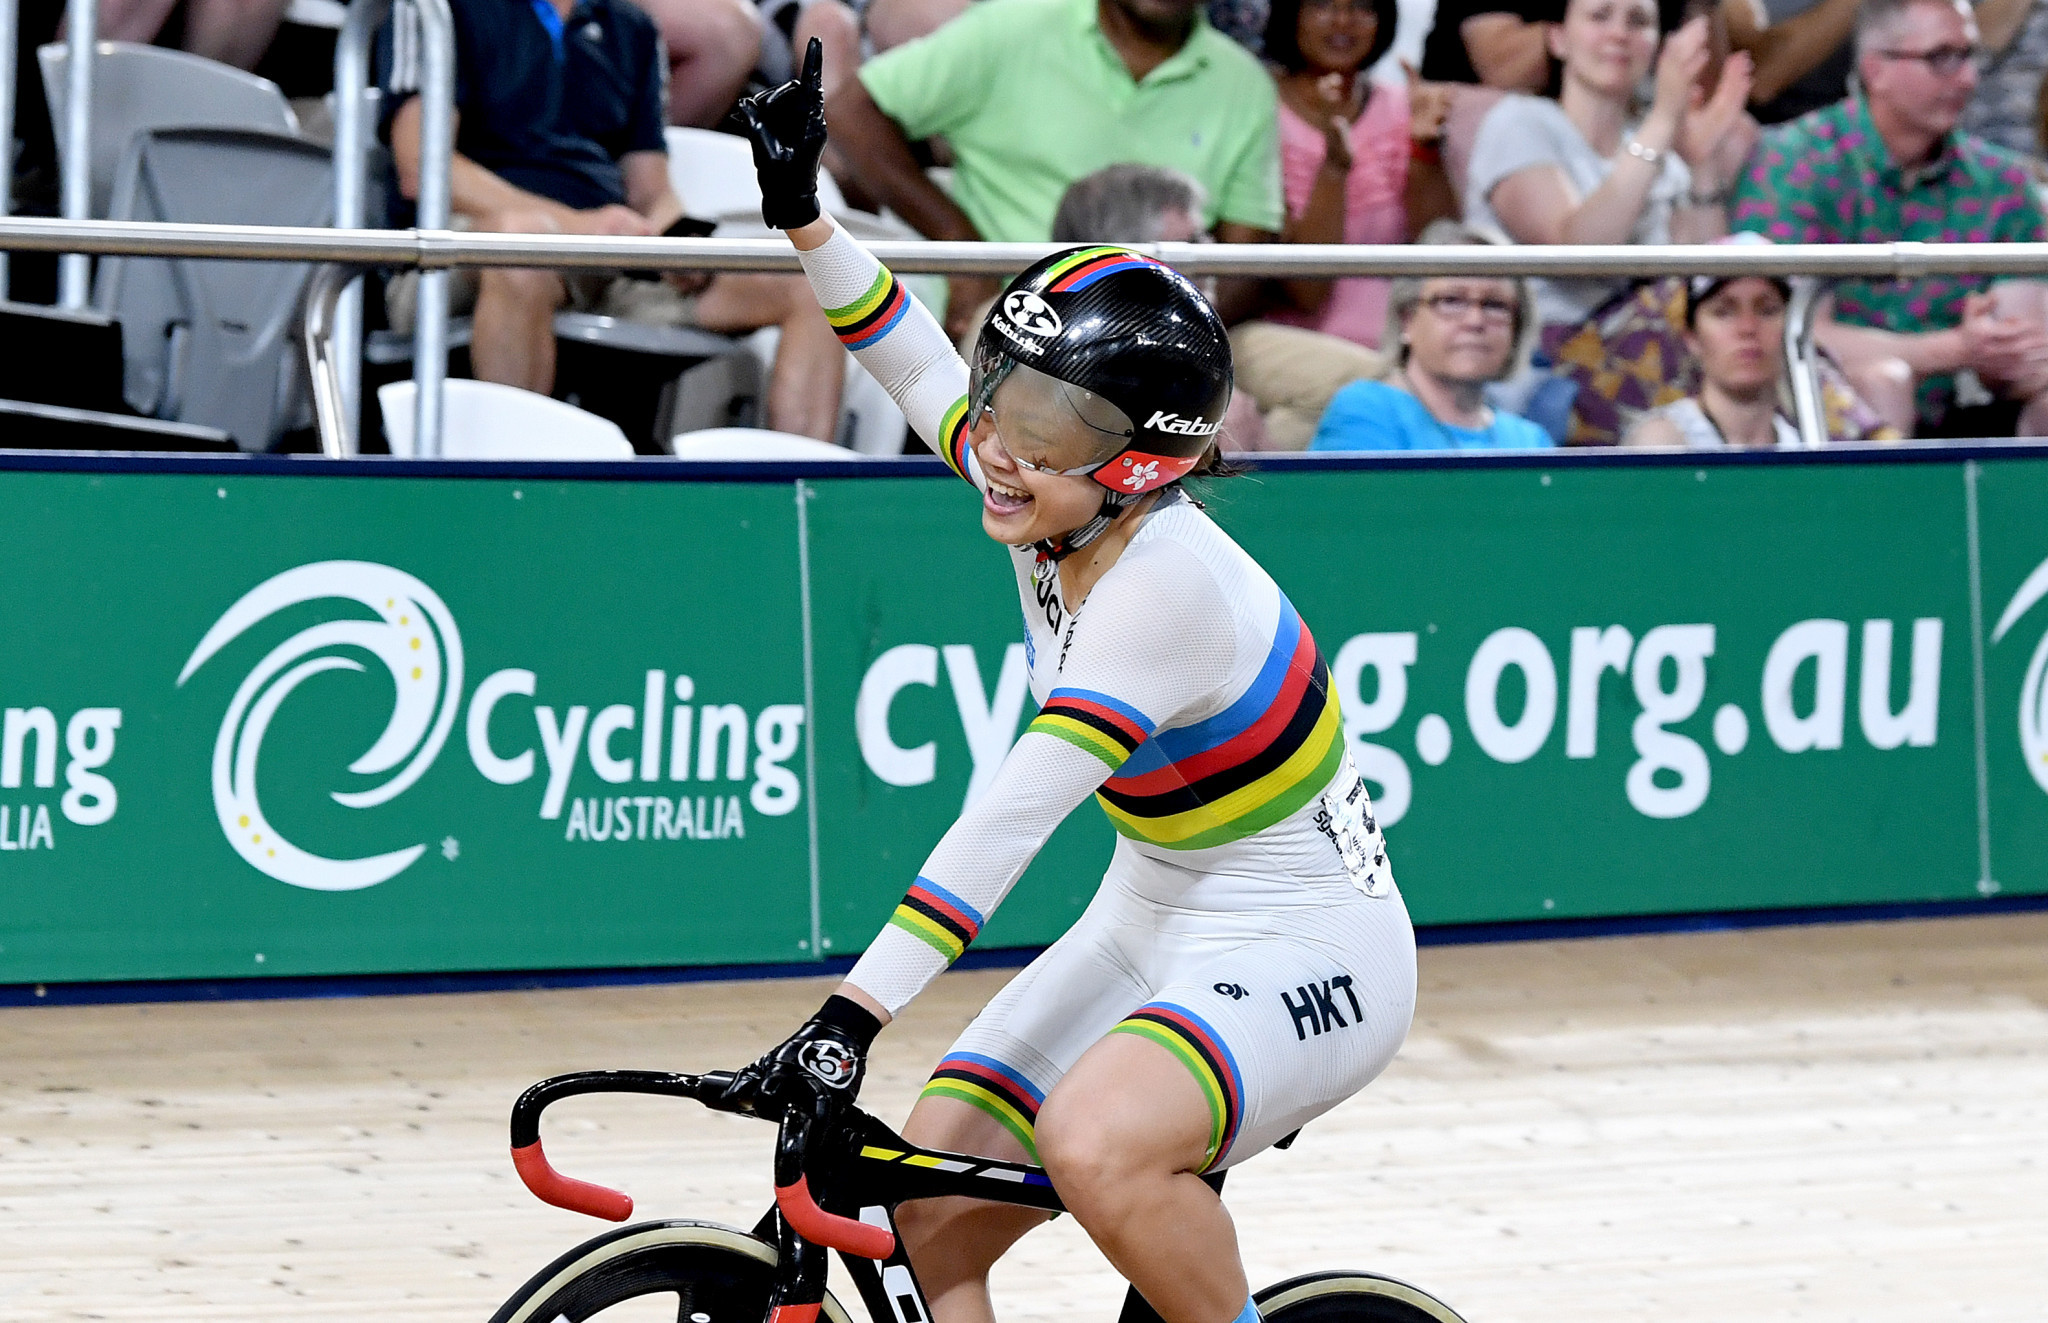 Lee Wai Sze won the women's sprint event in Brisbane ©Getty Images